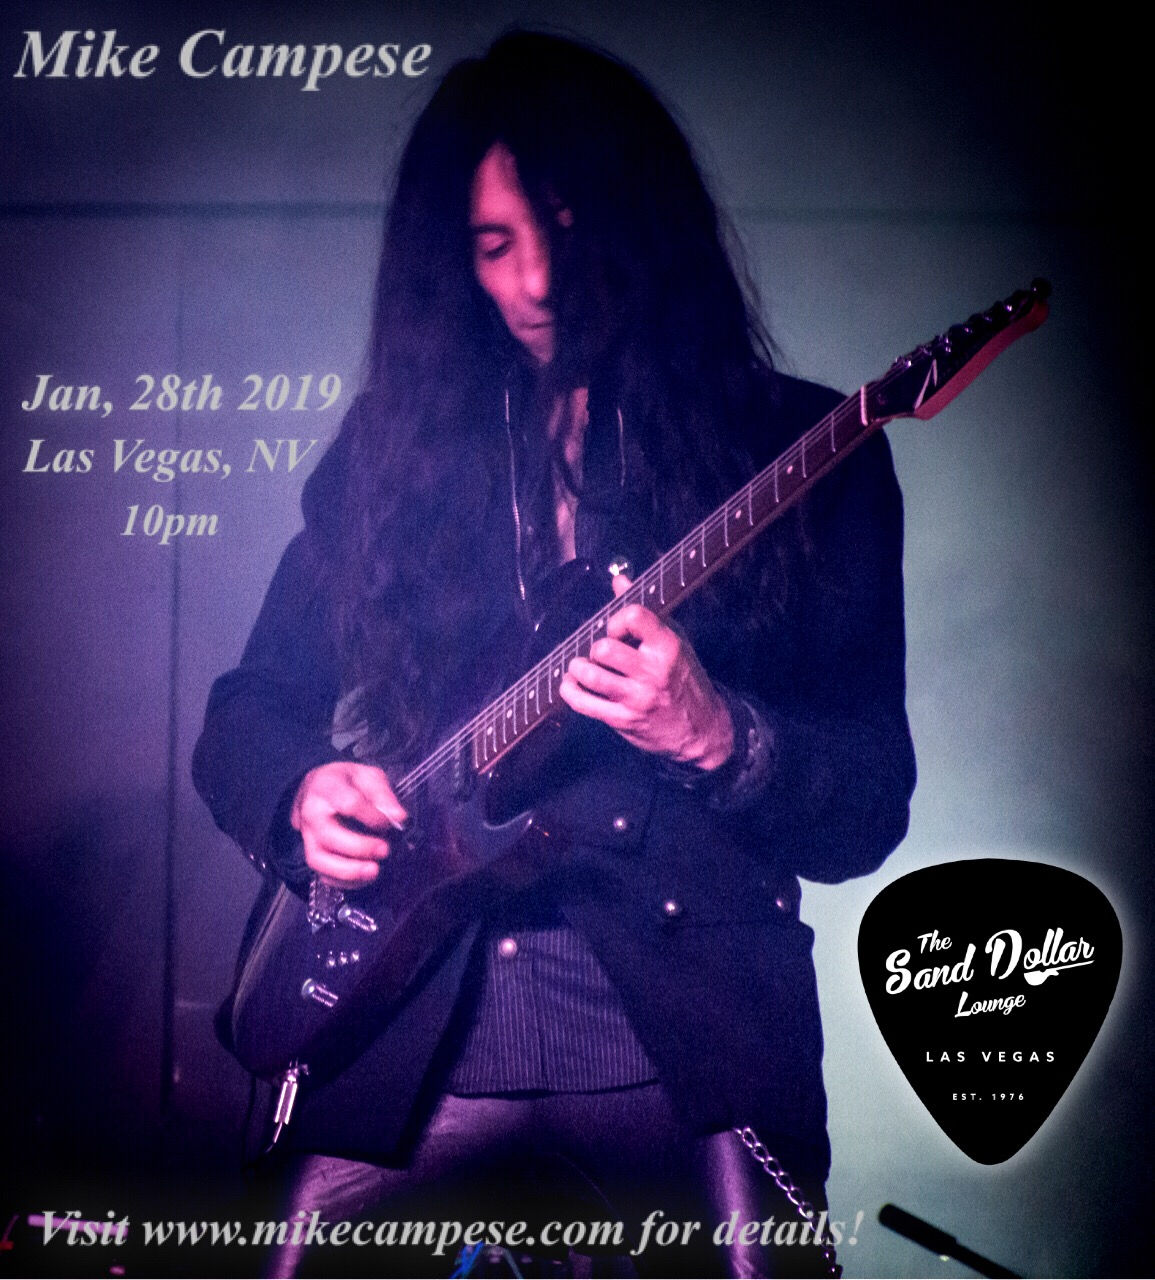 Mike Campese, The Sand Dollar, Las Vegas.